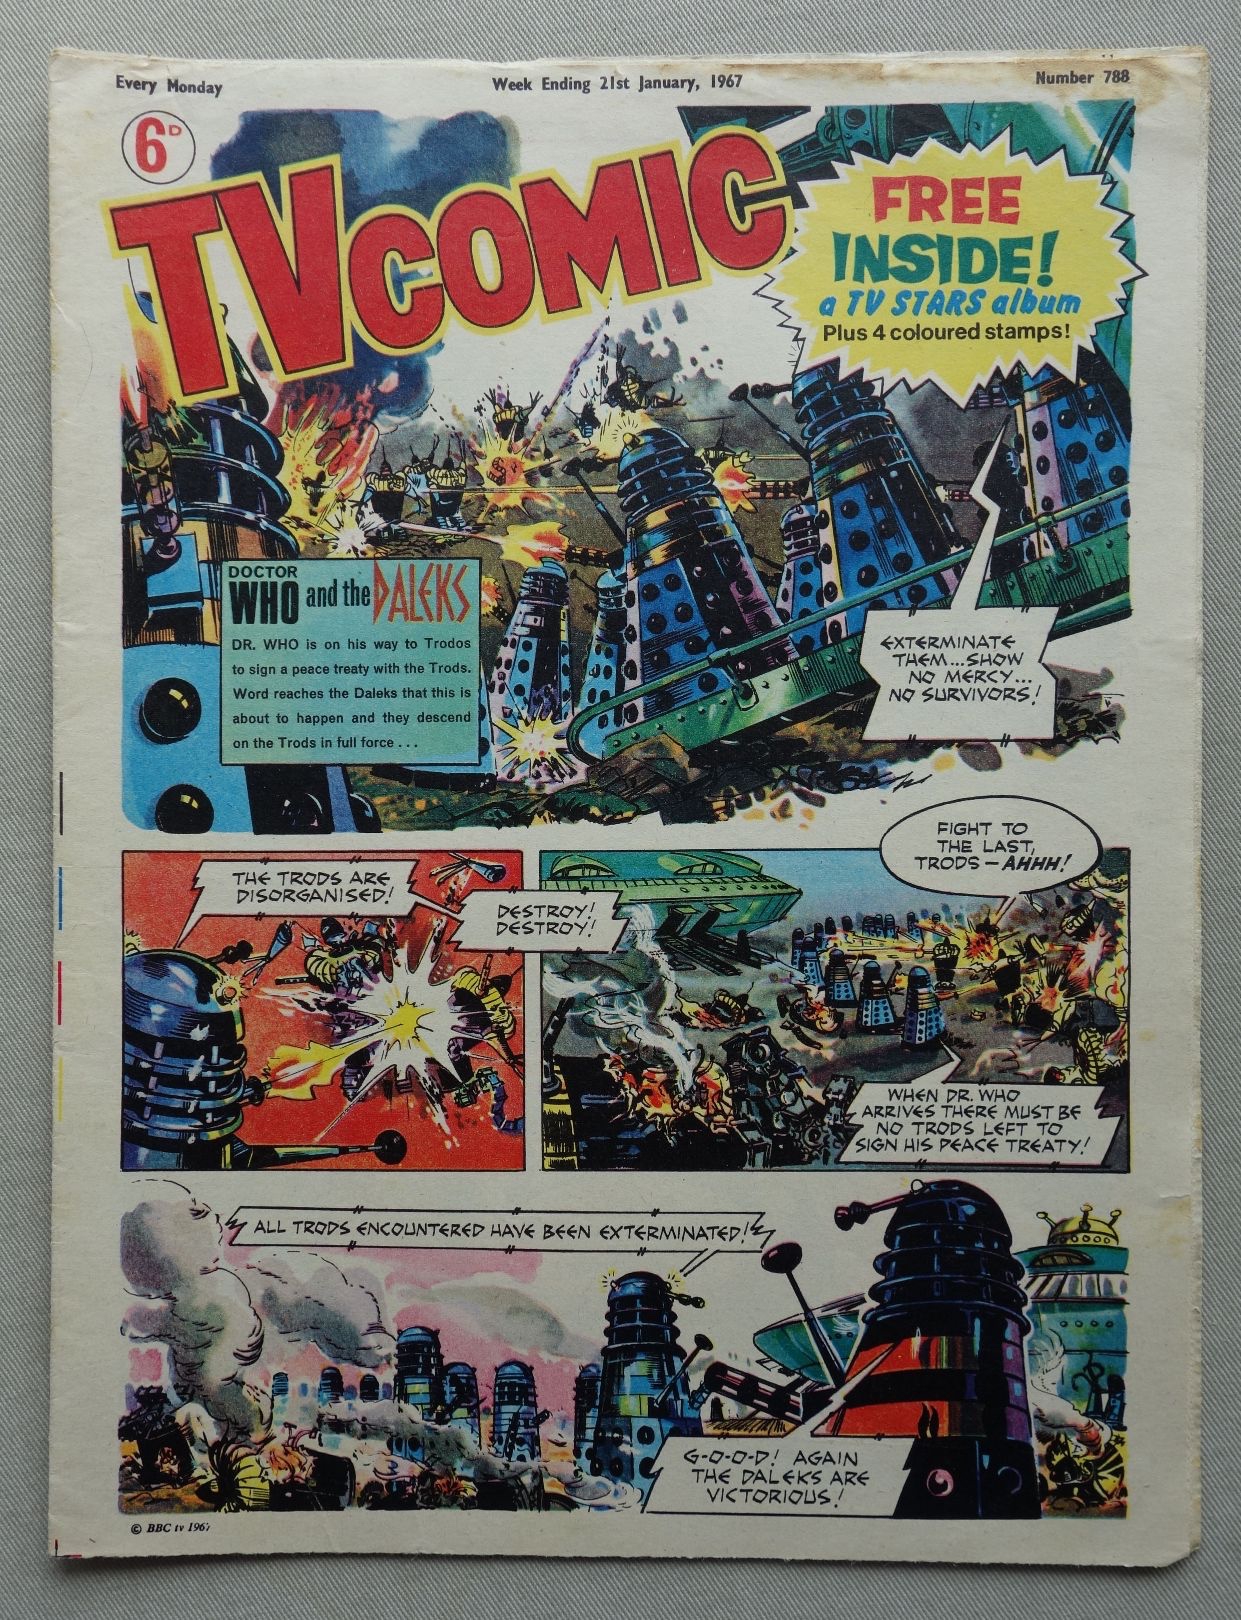 TV Comic No. 788, cover dated 21st January 1967 - Doctor Who and Daleks cover with first appearance of Patrick Troughton